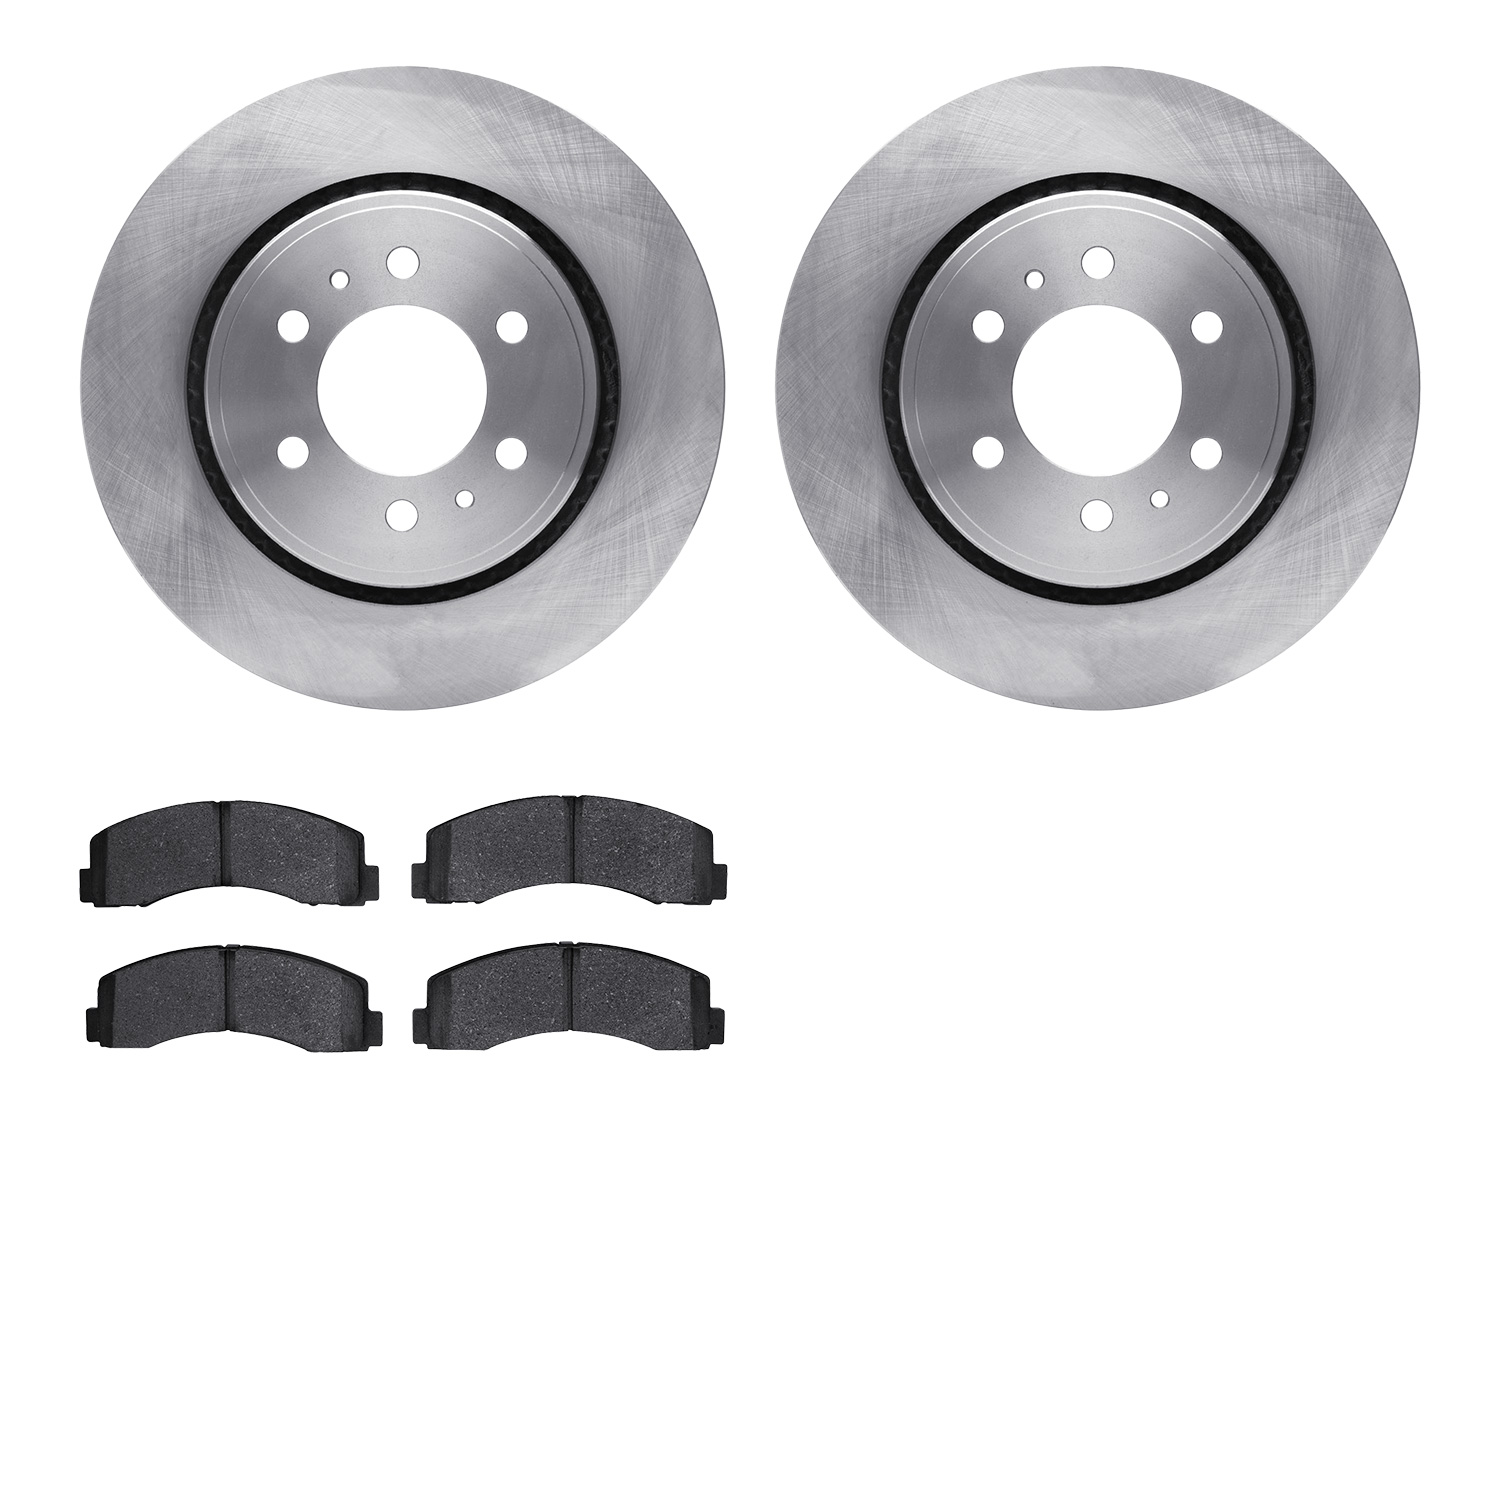 6402-54263 Brake Rotors with Ultimate-Duty Brake Pads, 2010-2021 Ford/Lincoln/Mercury/Mazda, Position: Front